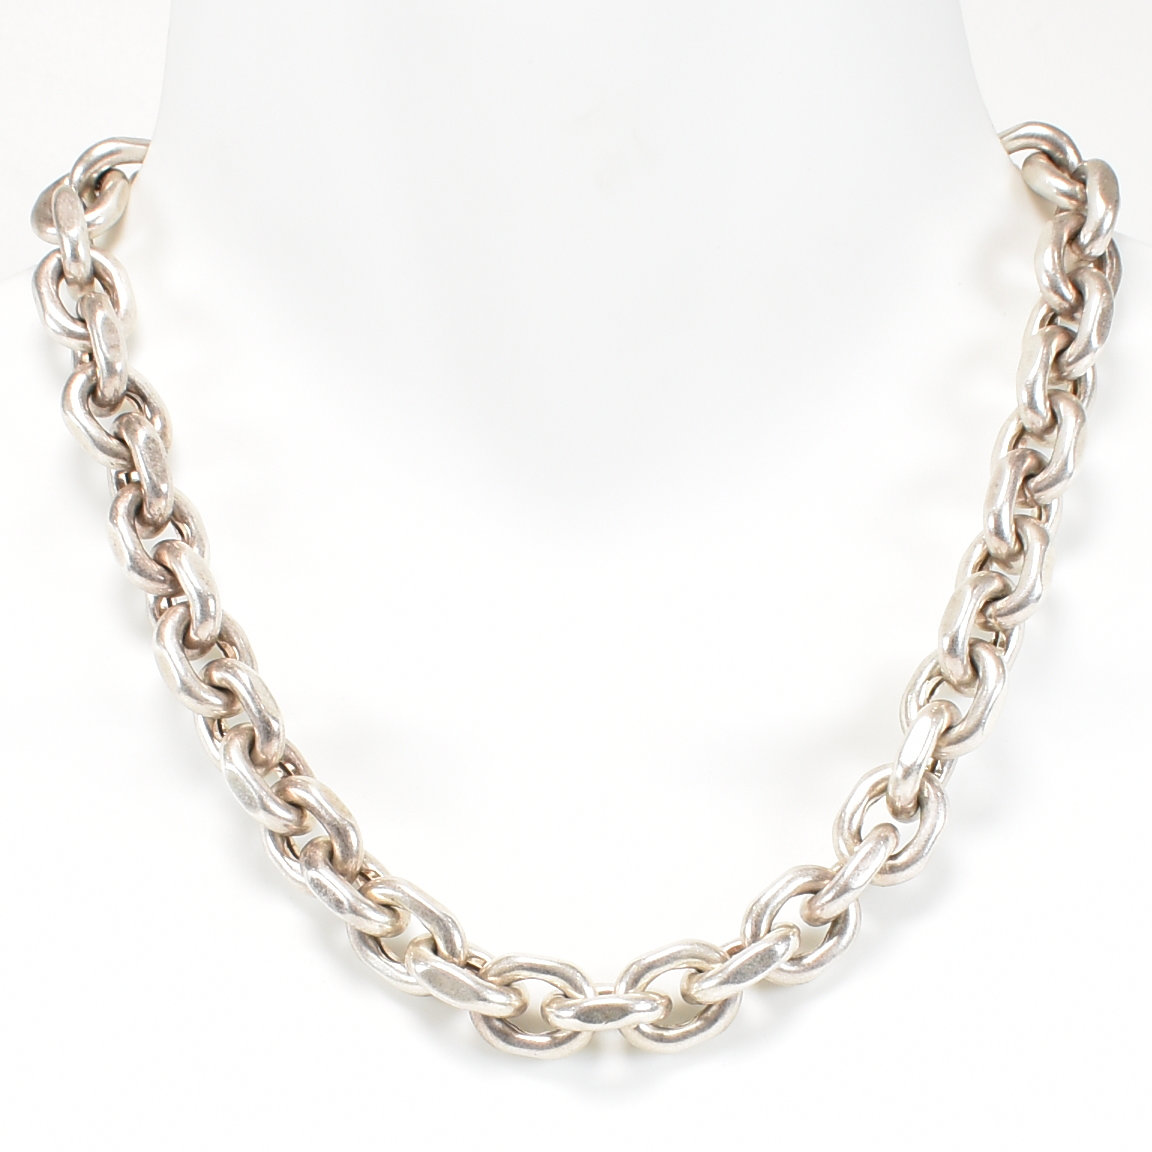 HALLMARKED 925 SILVER CABLE CHAIN NECKLACE - Image 2 of 5